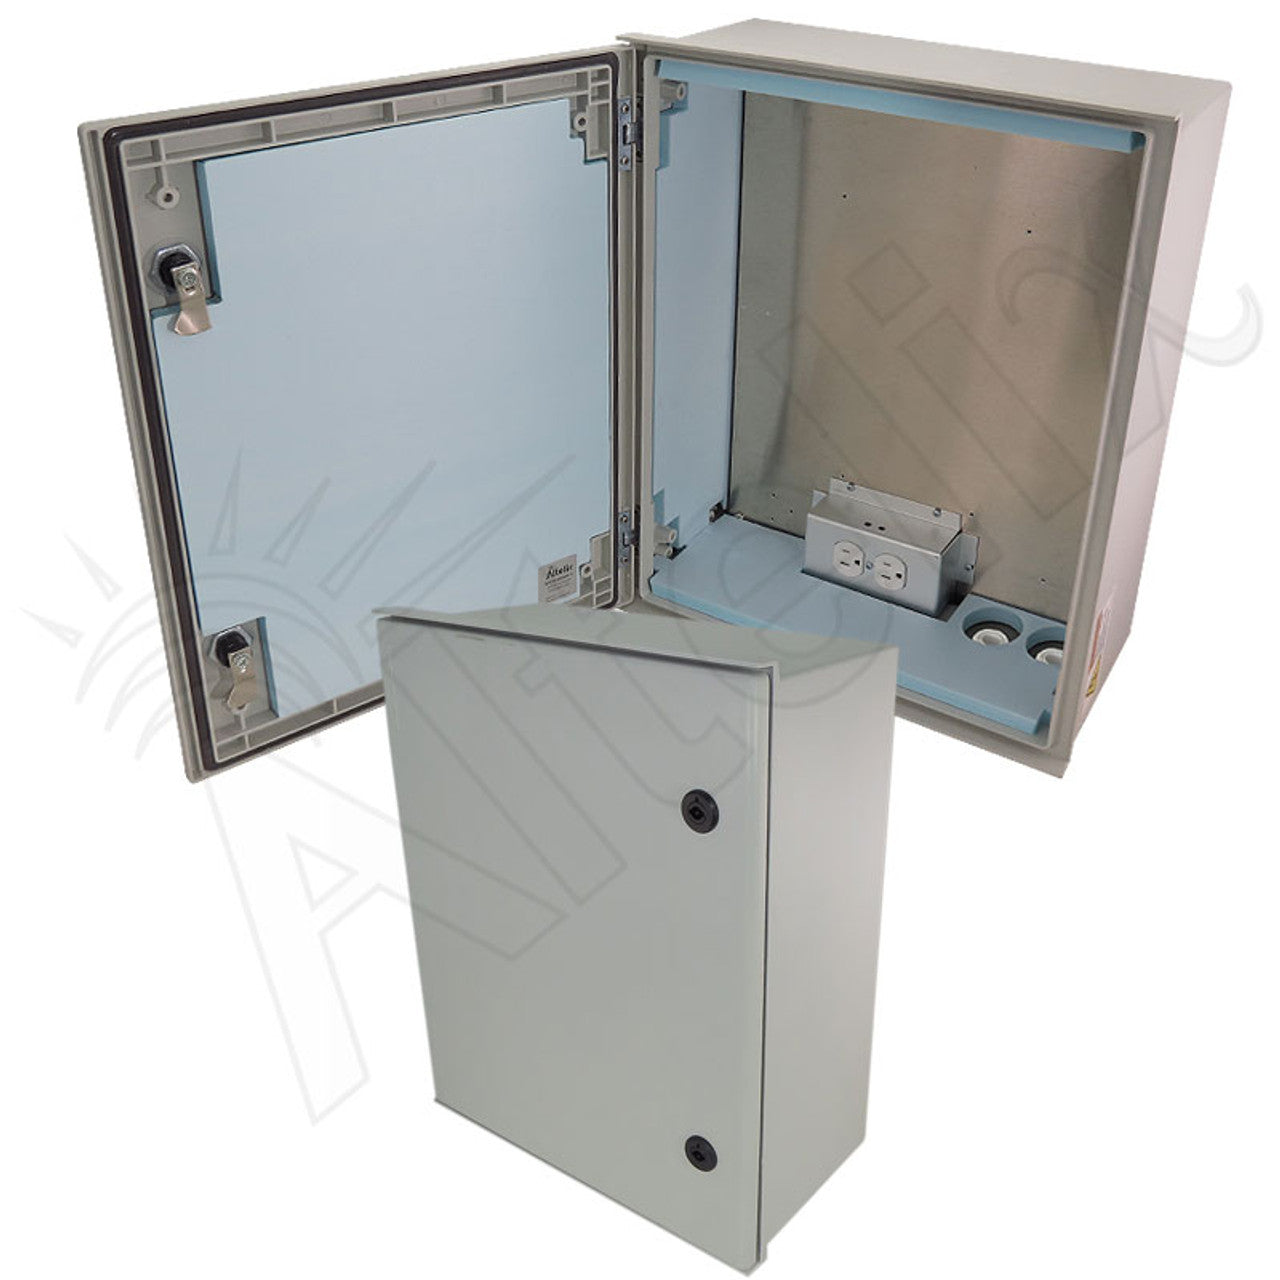 Altelix Insulated NEMA 4X Fiberglass Heated Weatherproof Enclosure with 200W Heater and 120 VAC Outlets